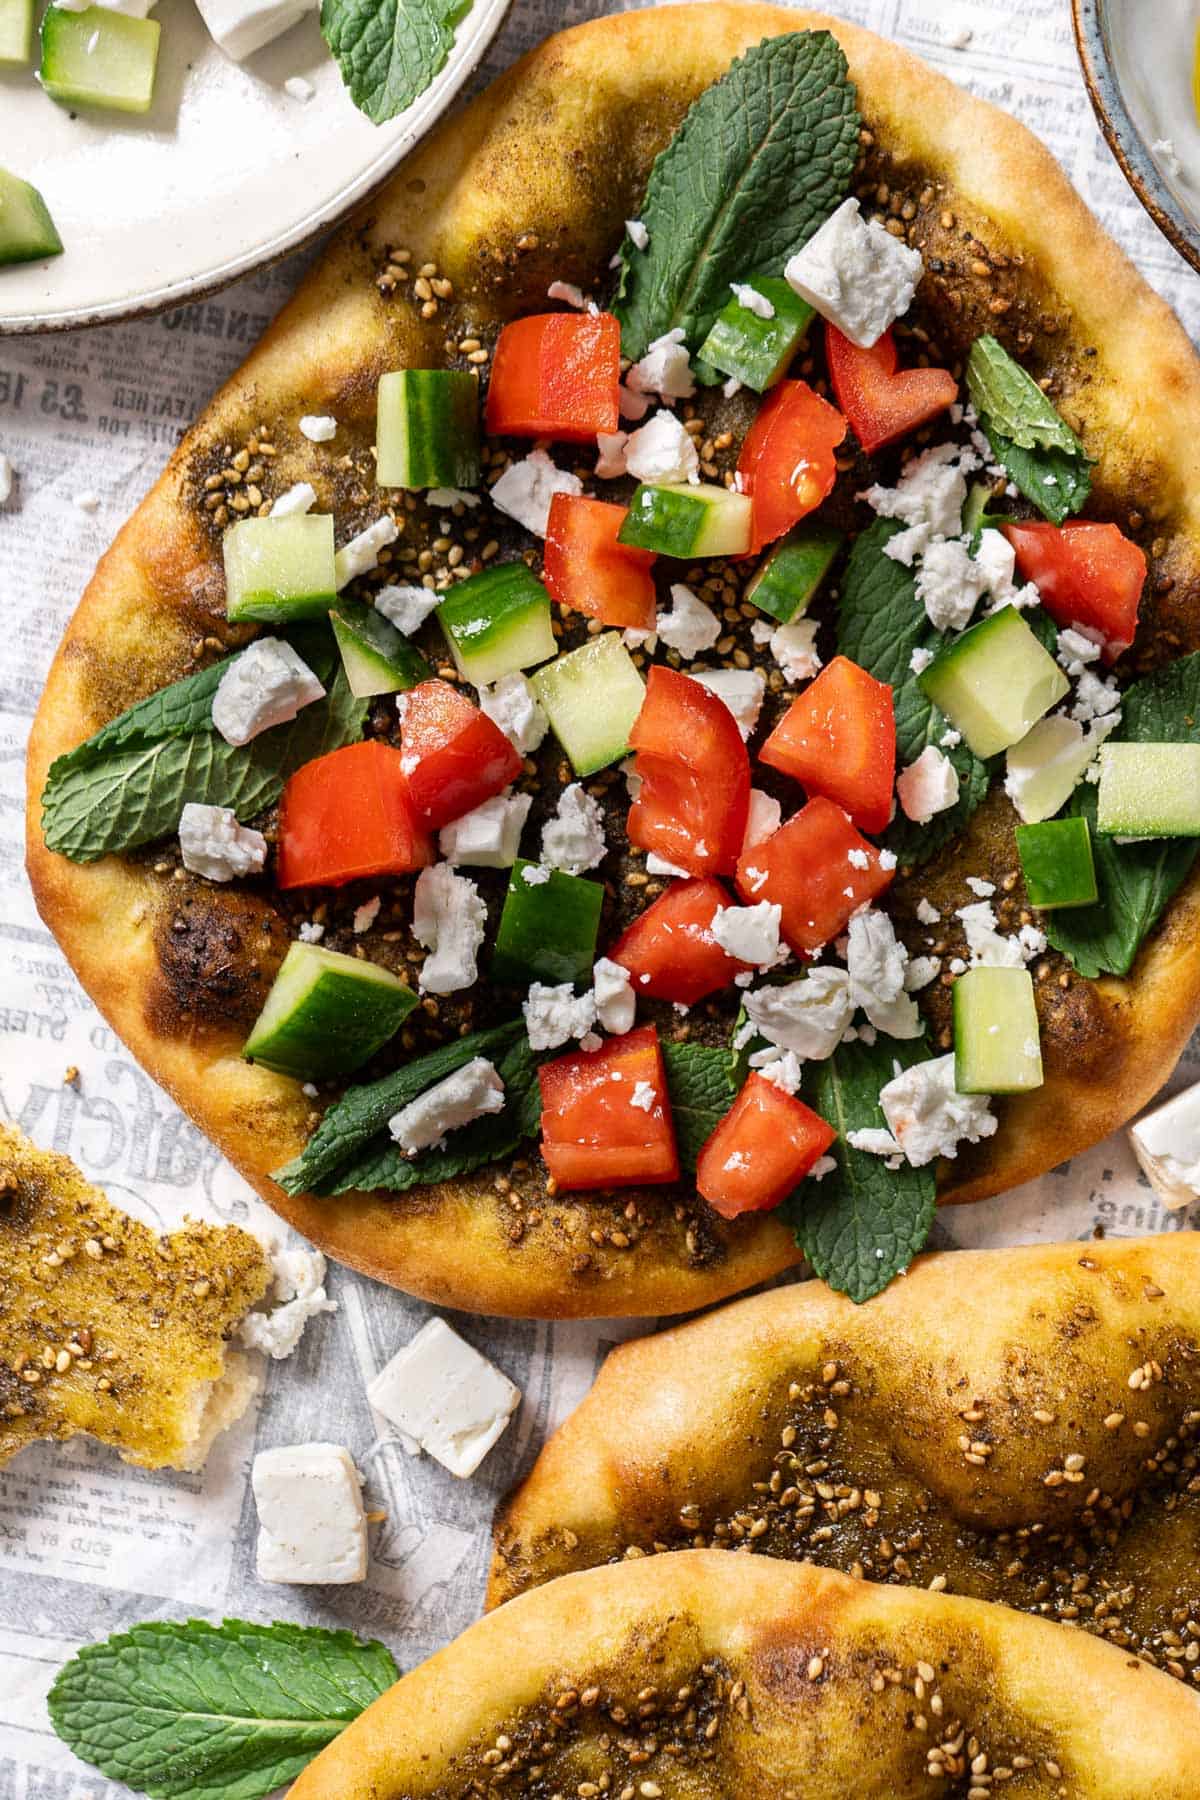 Lebanese flatbread with the typical toppings.